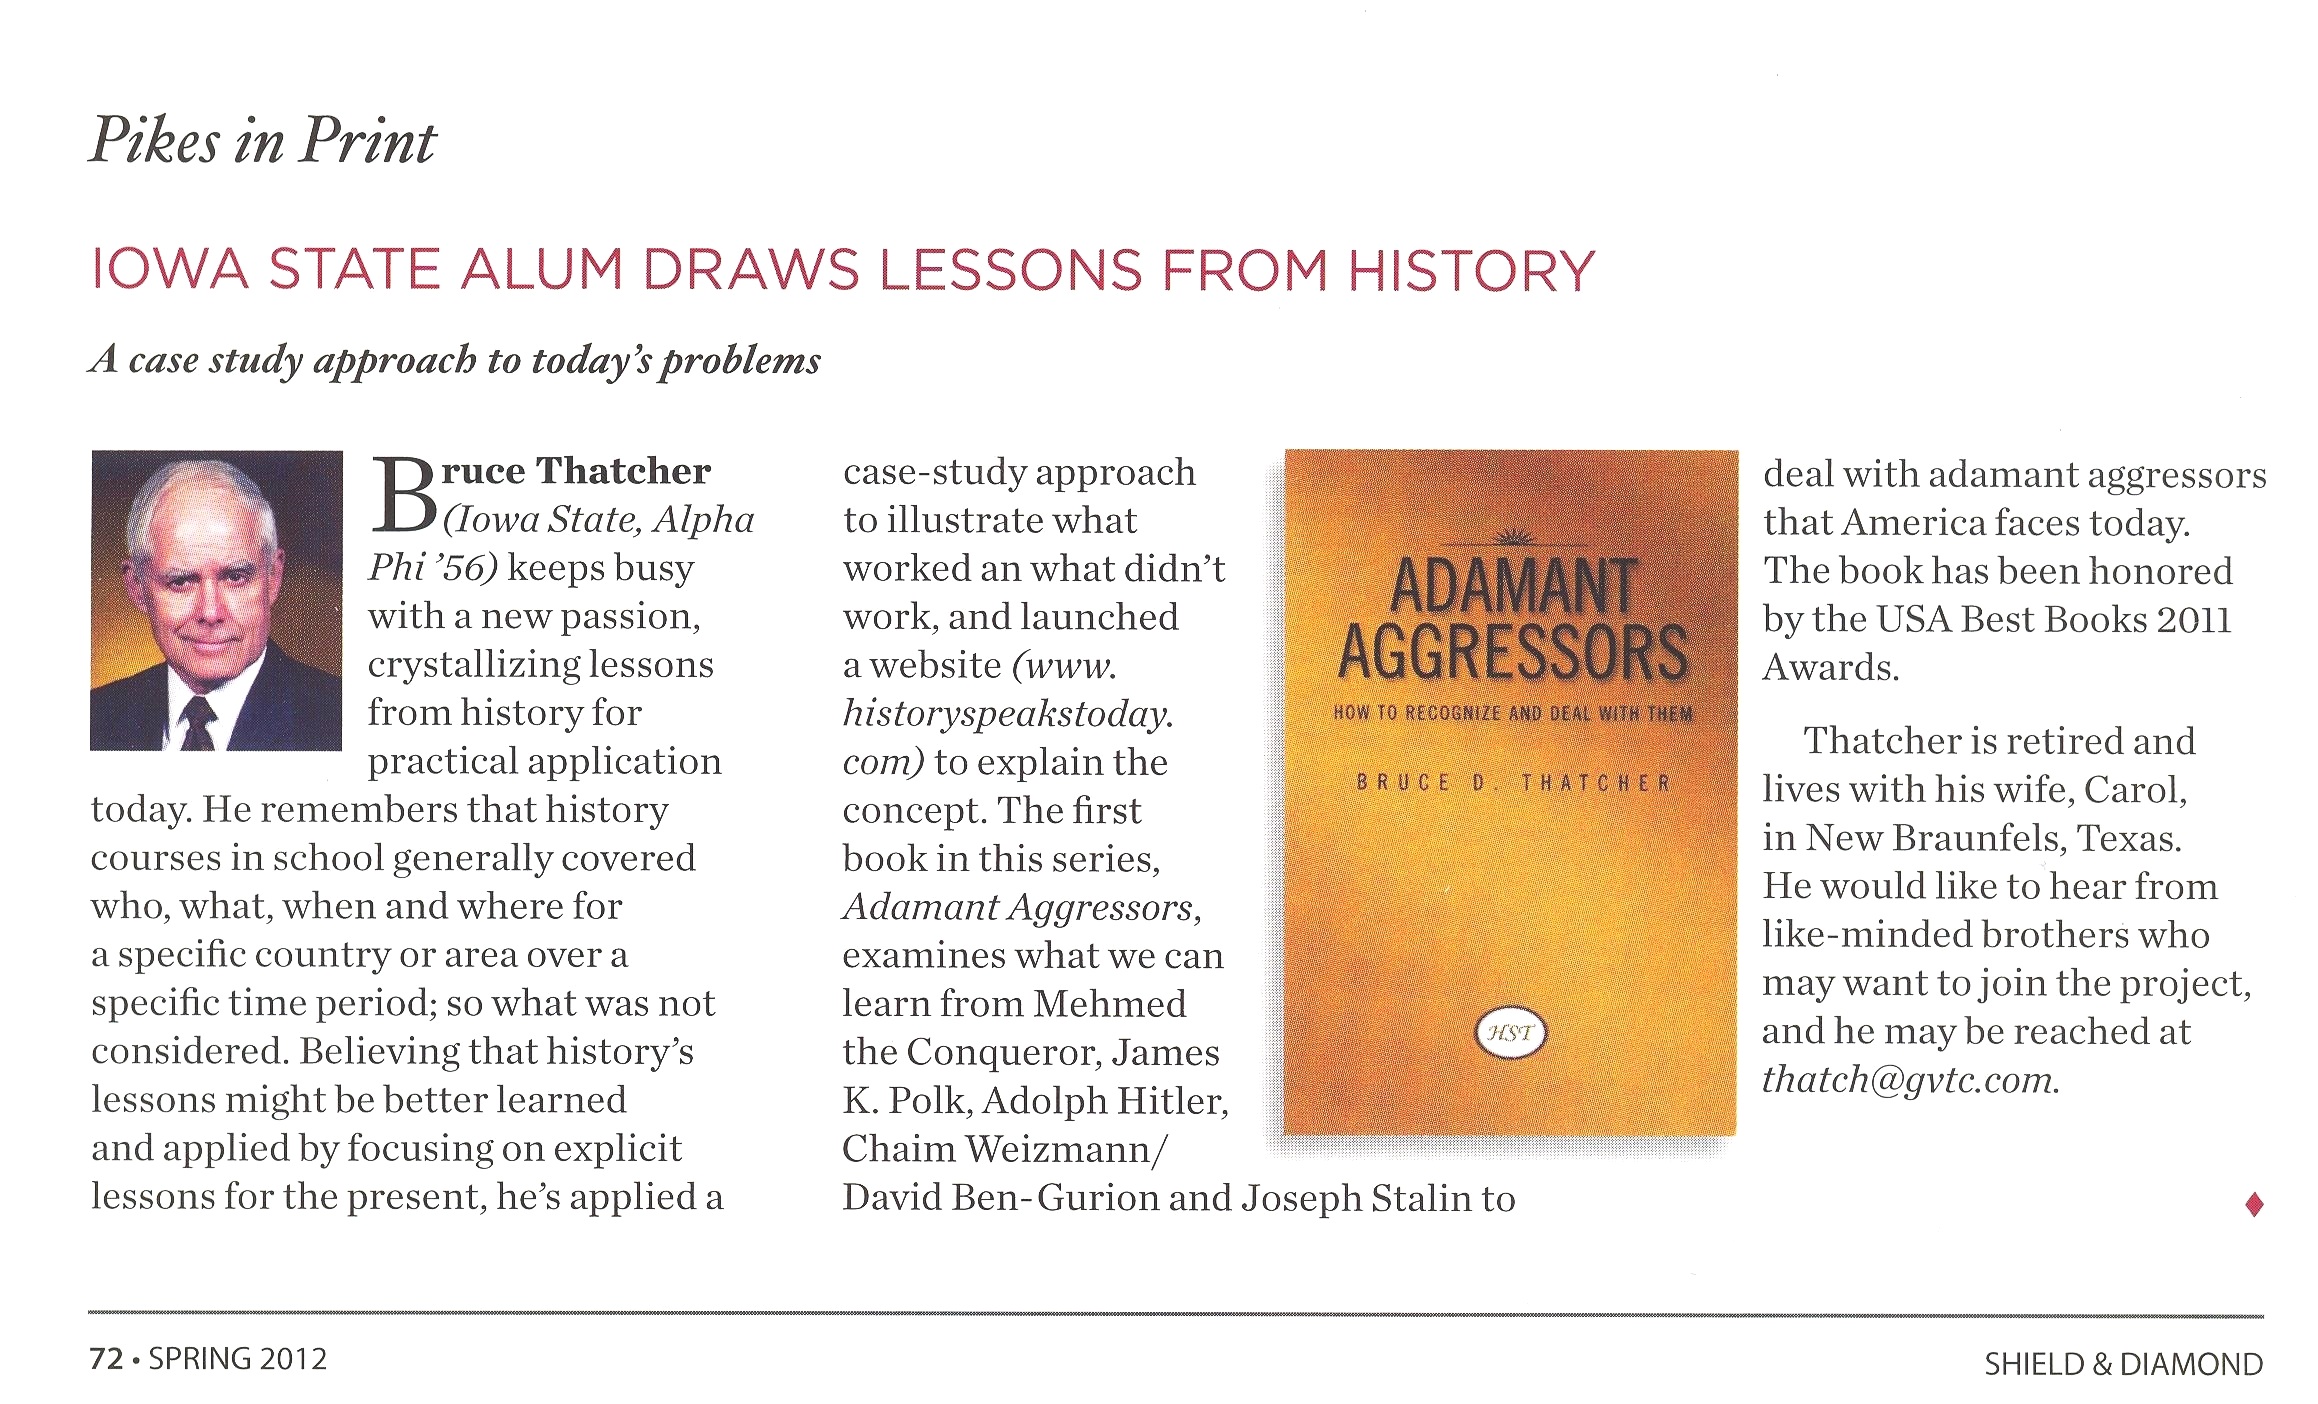 Pikes in Print article about Bruce Thatcher's book Adamant Aggressors